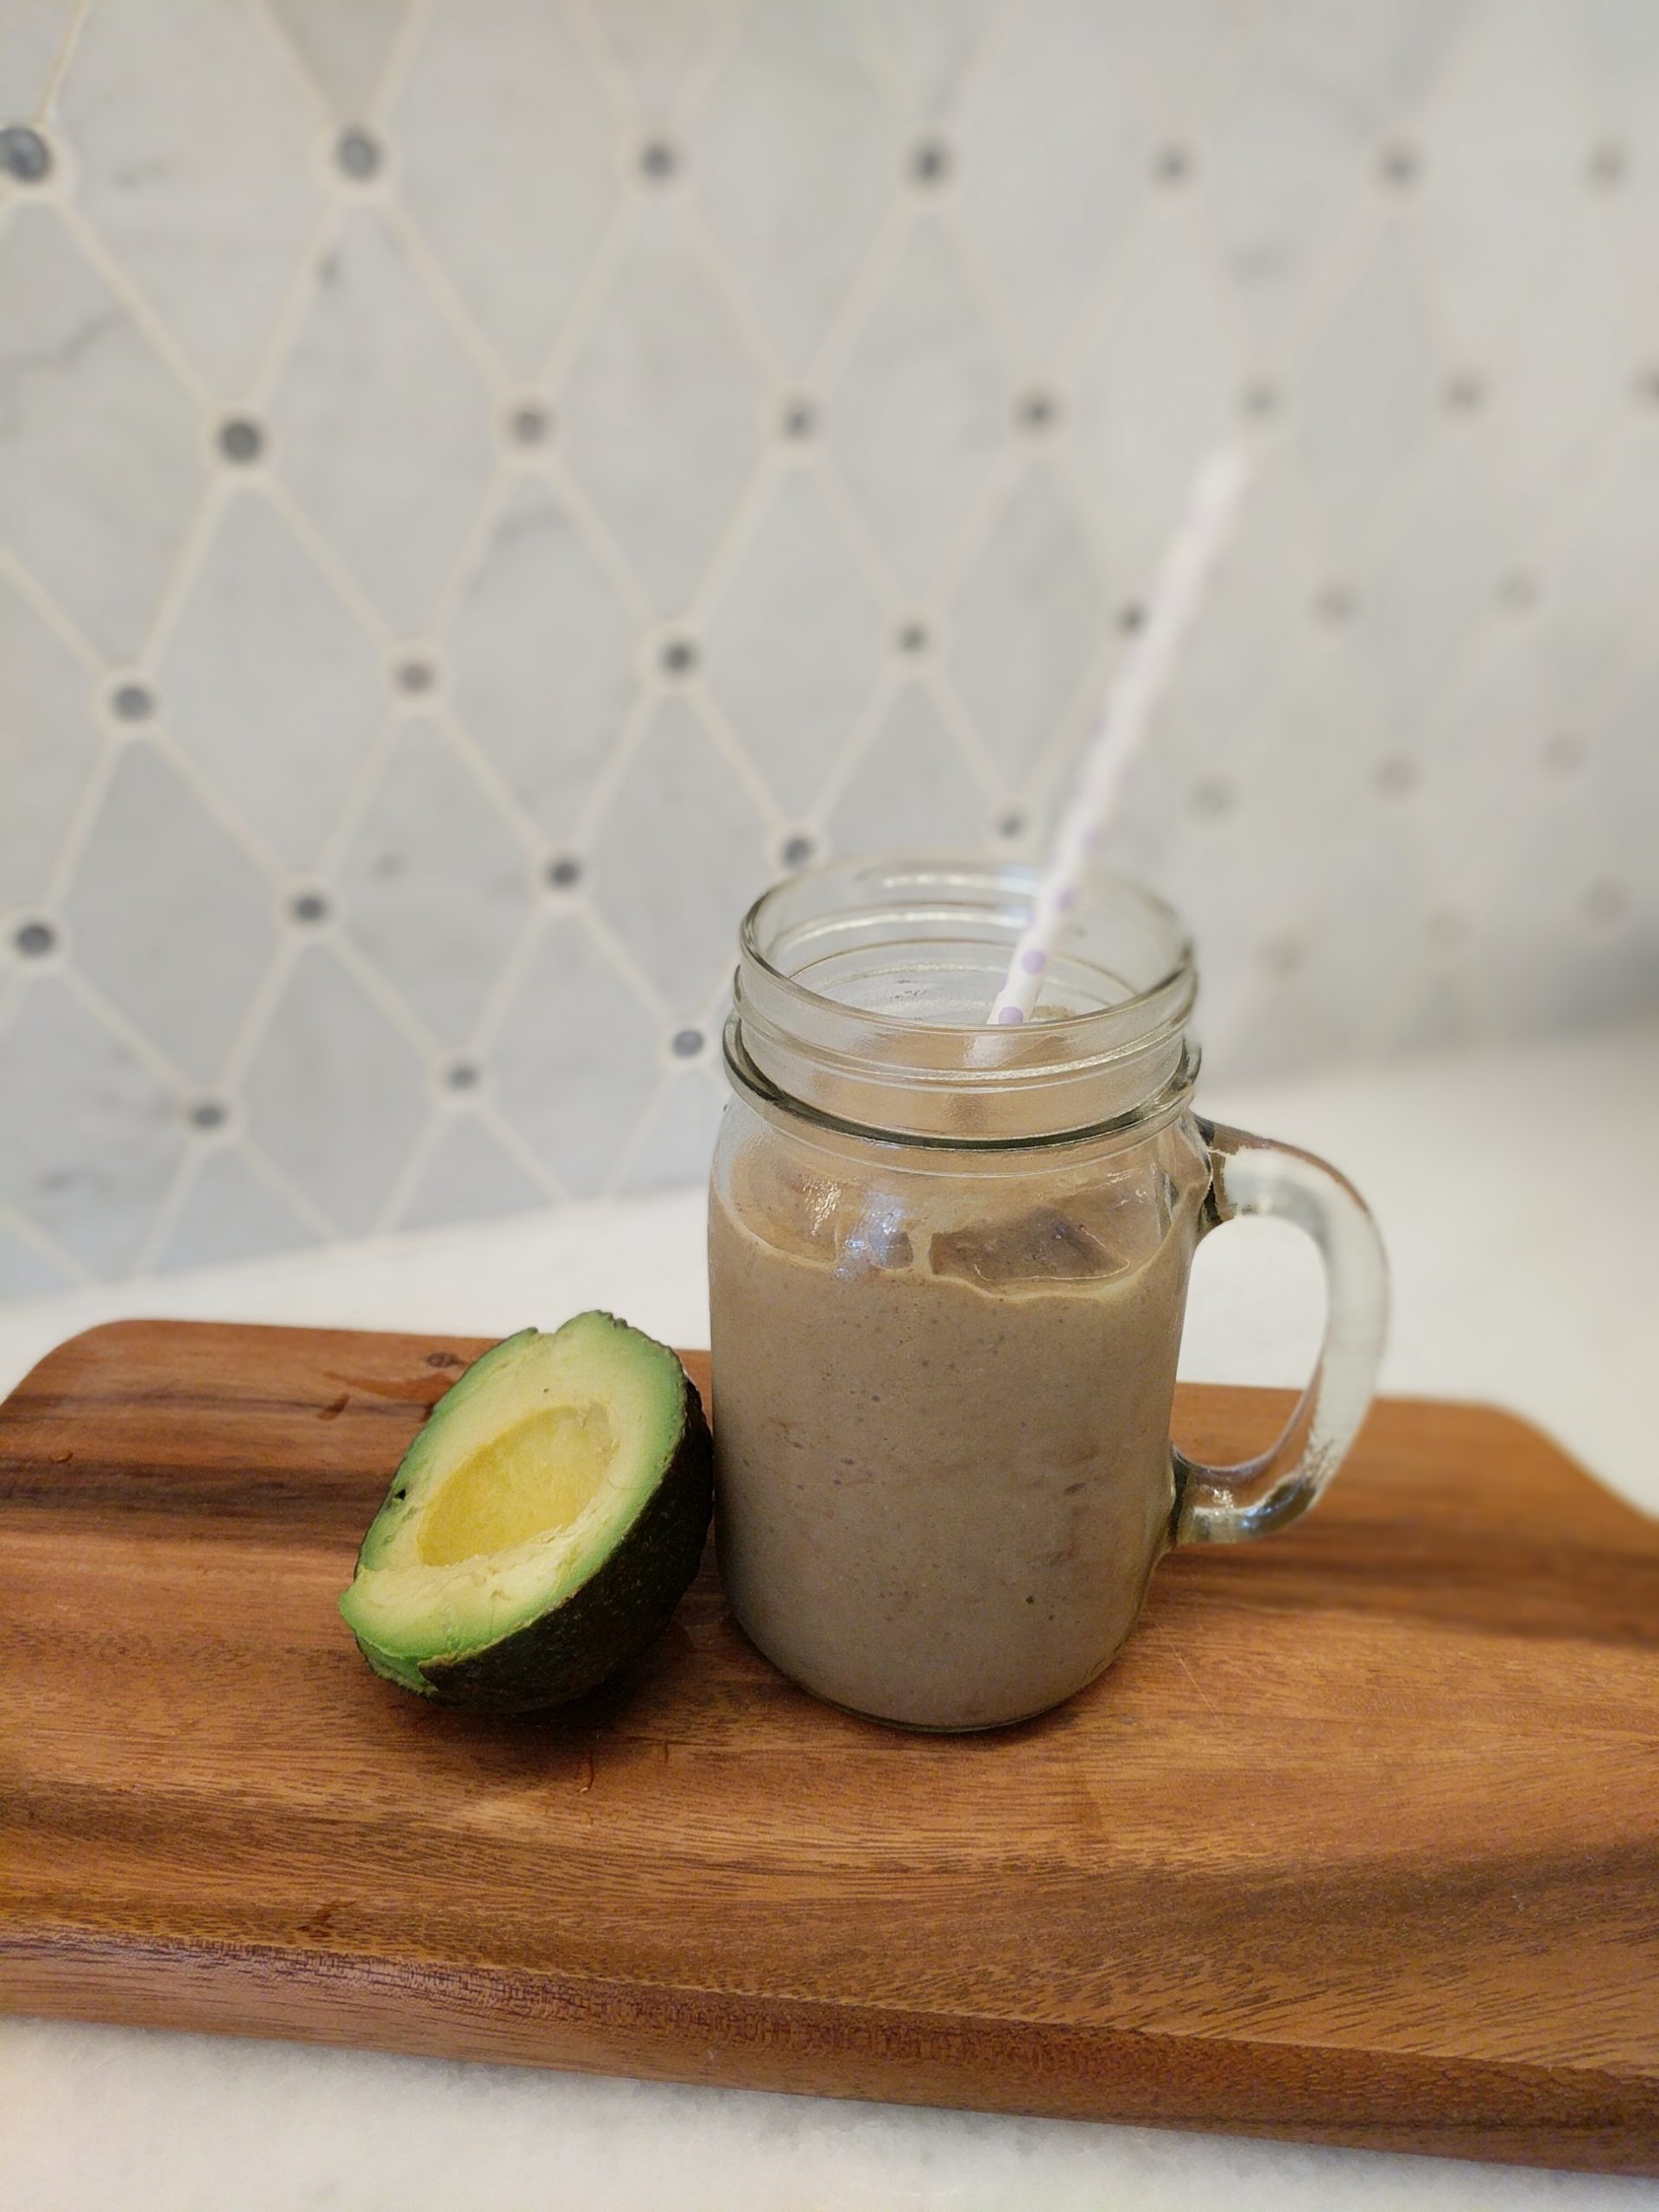 Our favorite Chocolate Peanut Butter Smoothie